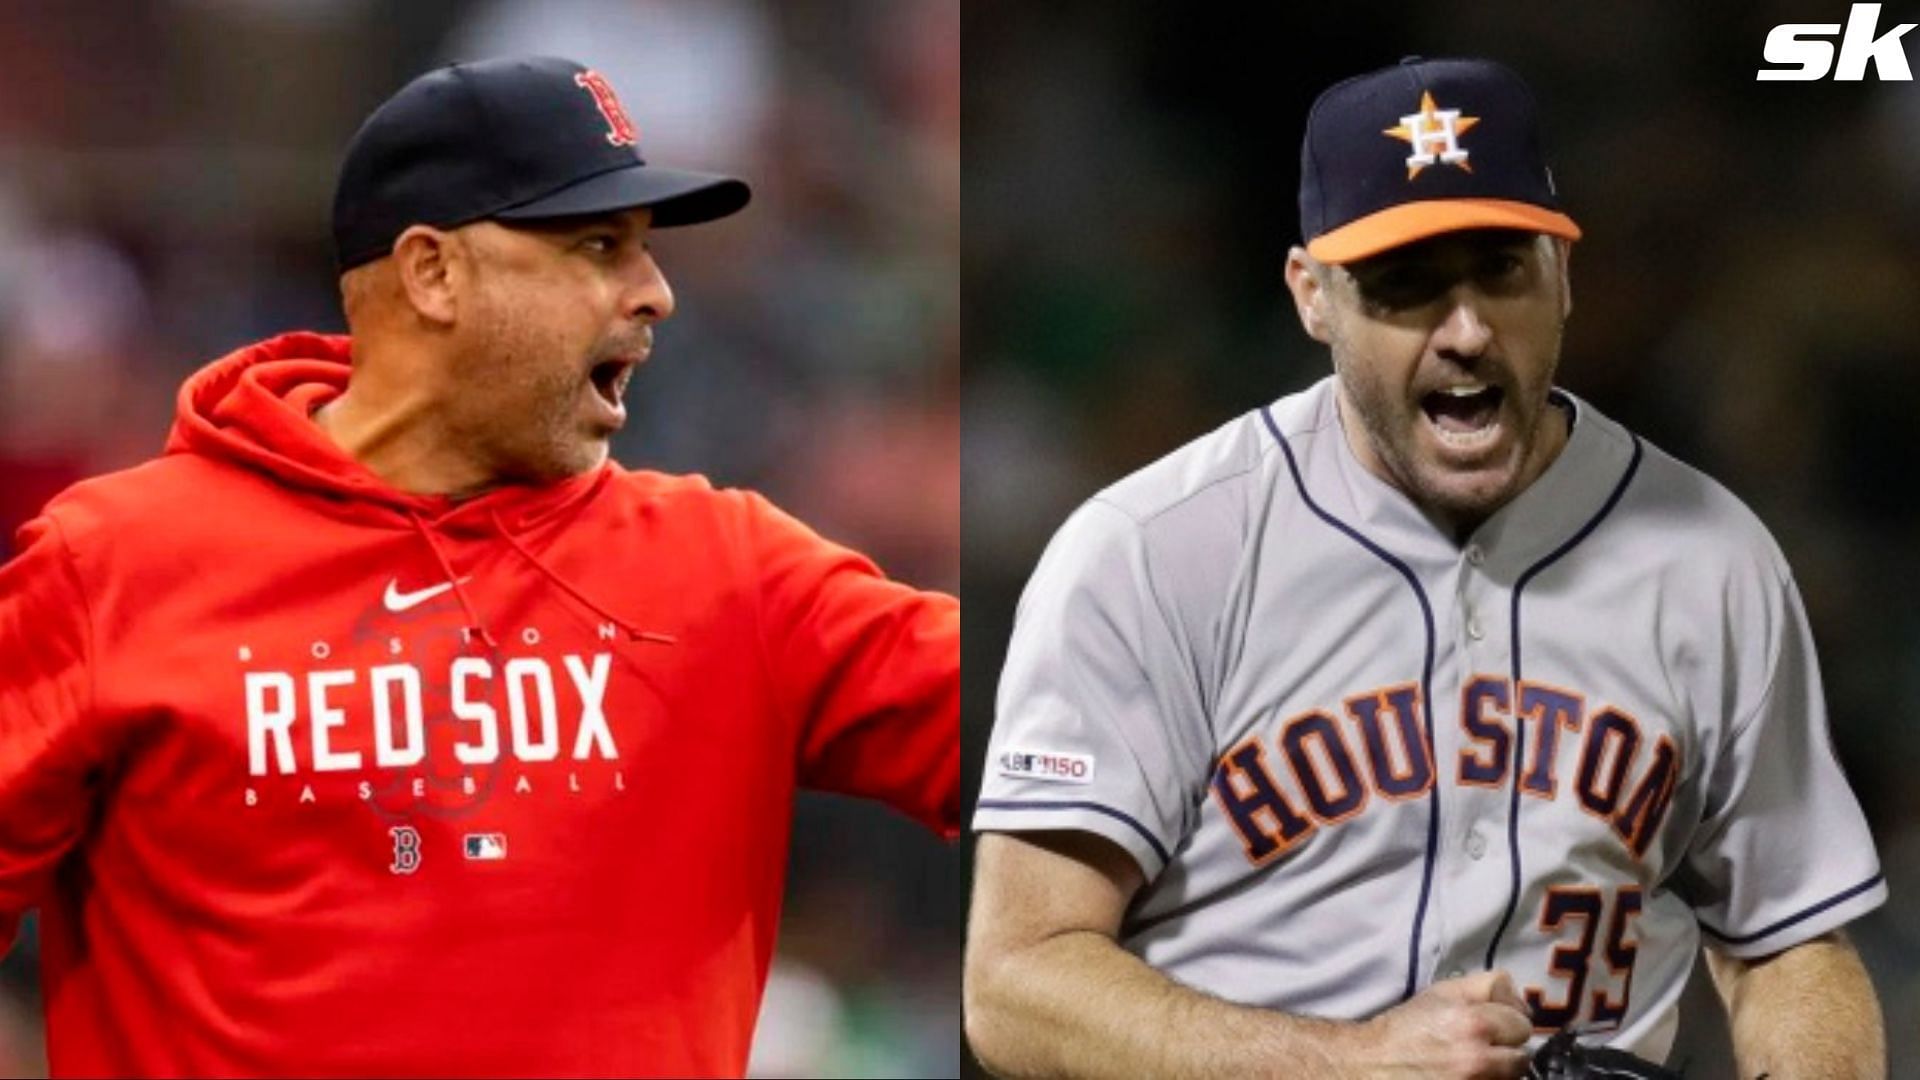  Justin Verlander frustratingly tells Red Sox manager Alex Cora to get off the field